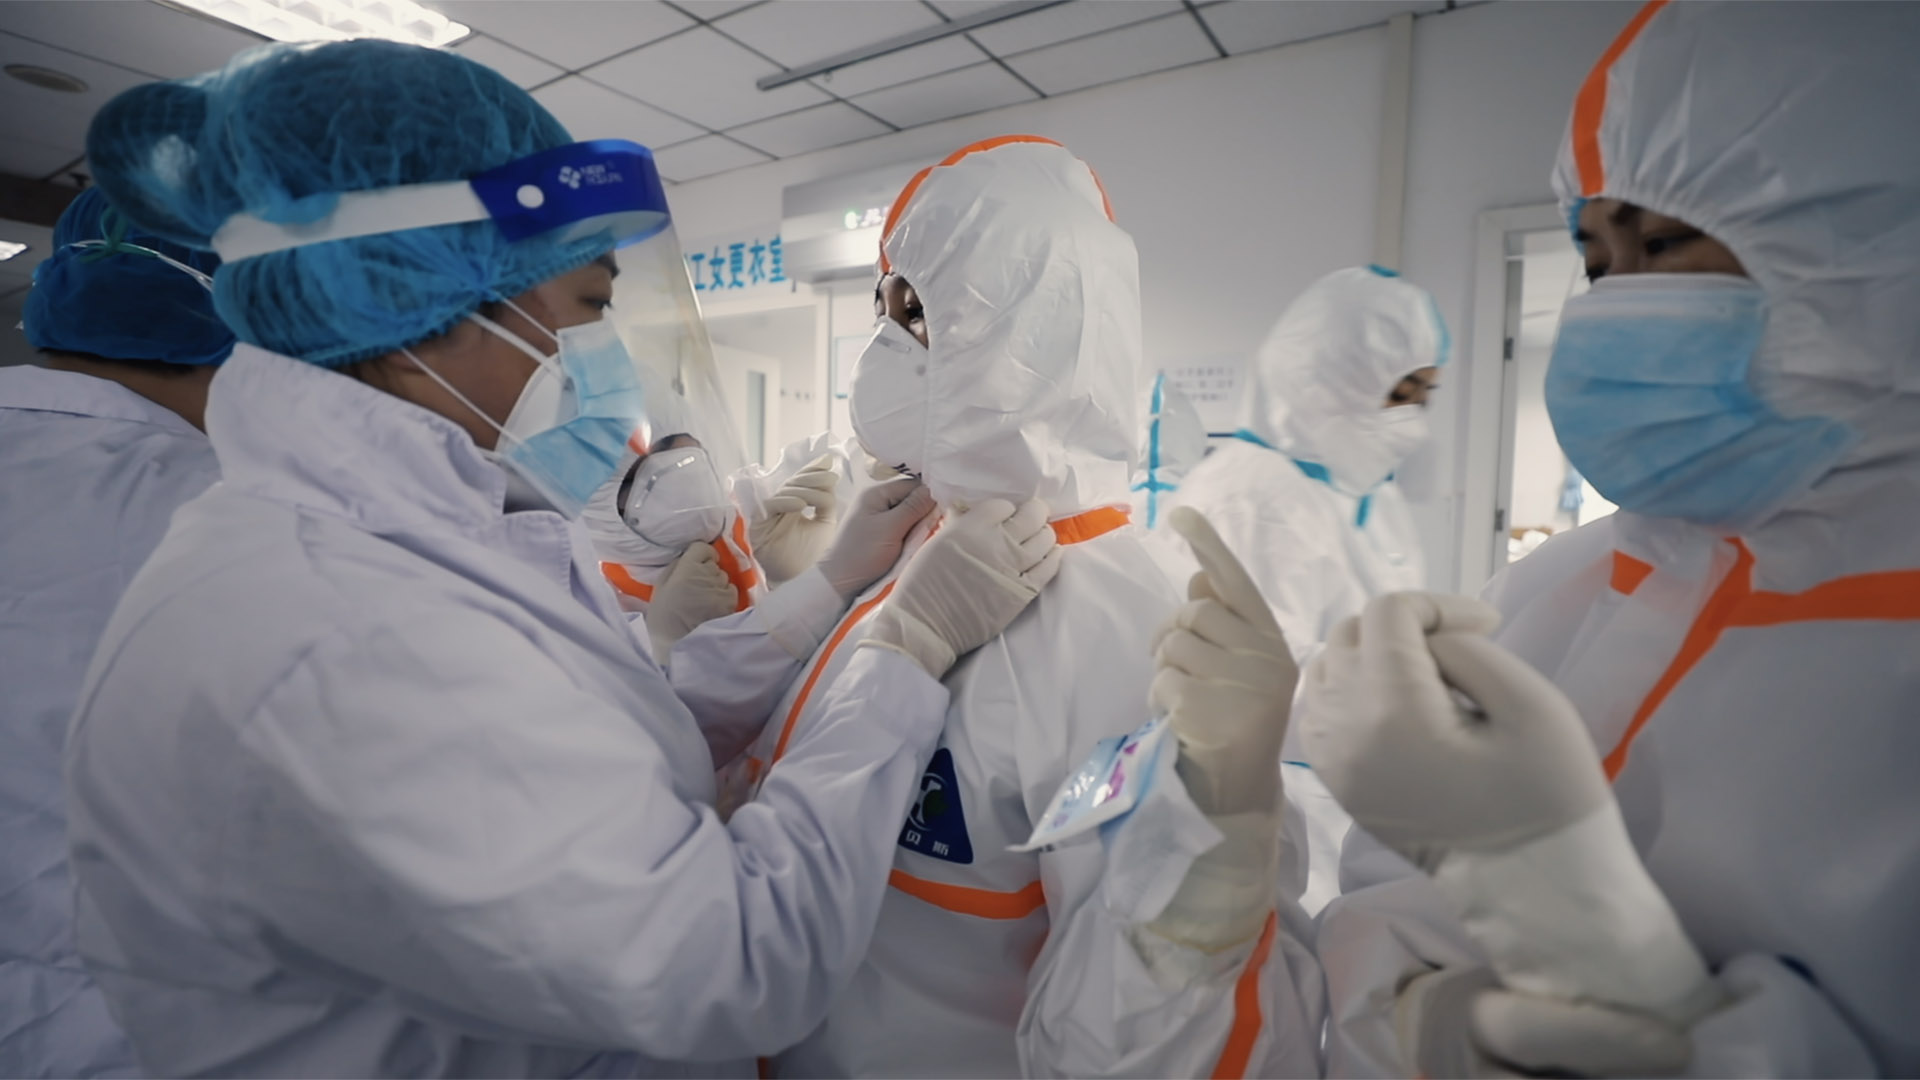 Trailer still frame from 76 Days, people in hazmat suits and surgical gear